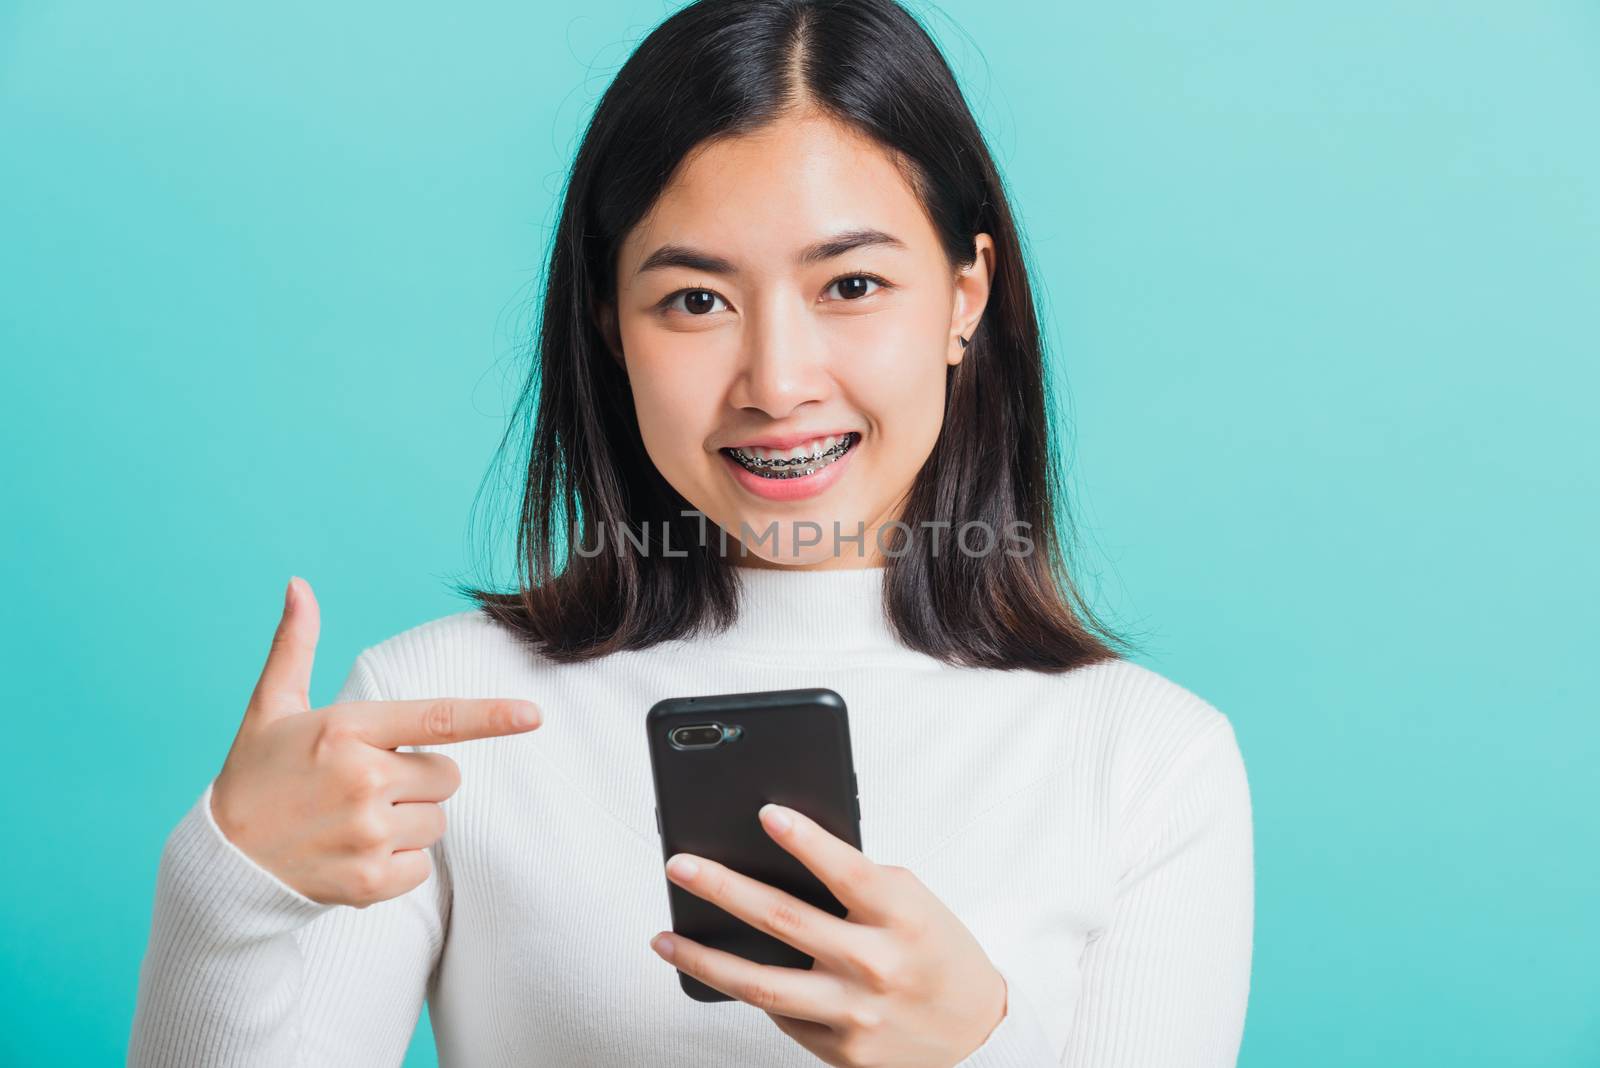 woman smile she pointing finger to a smartphone by Sorapop